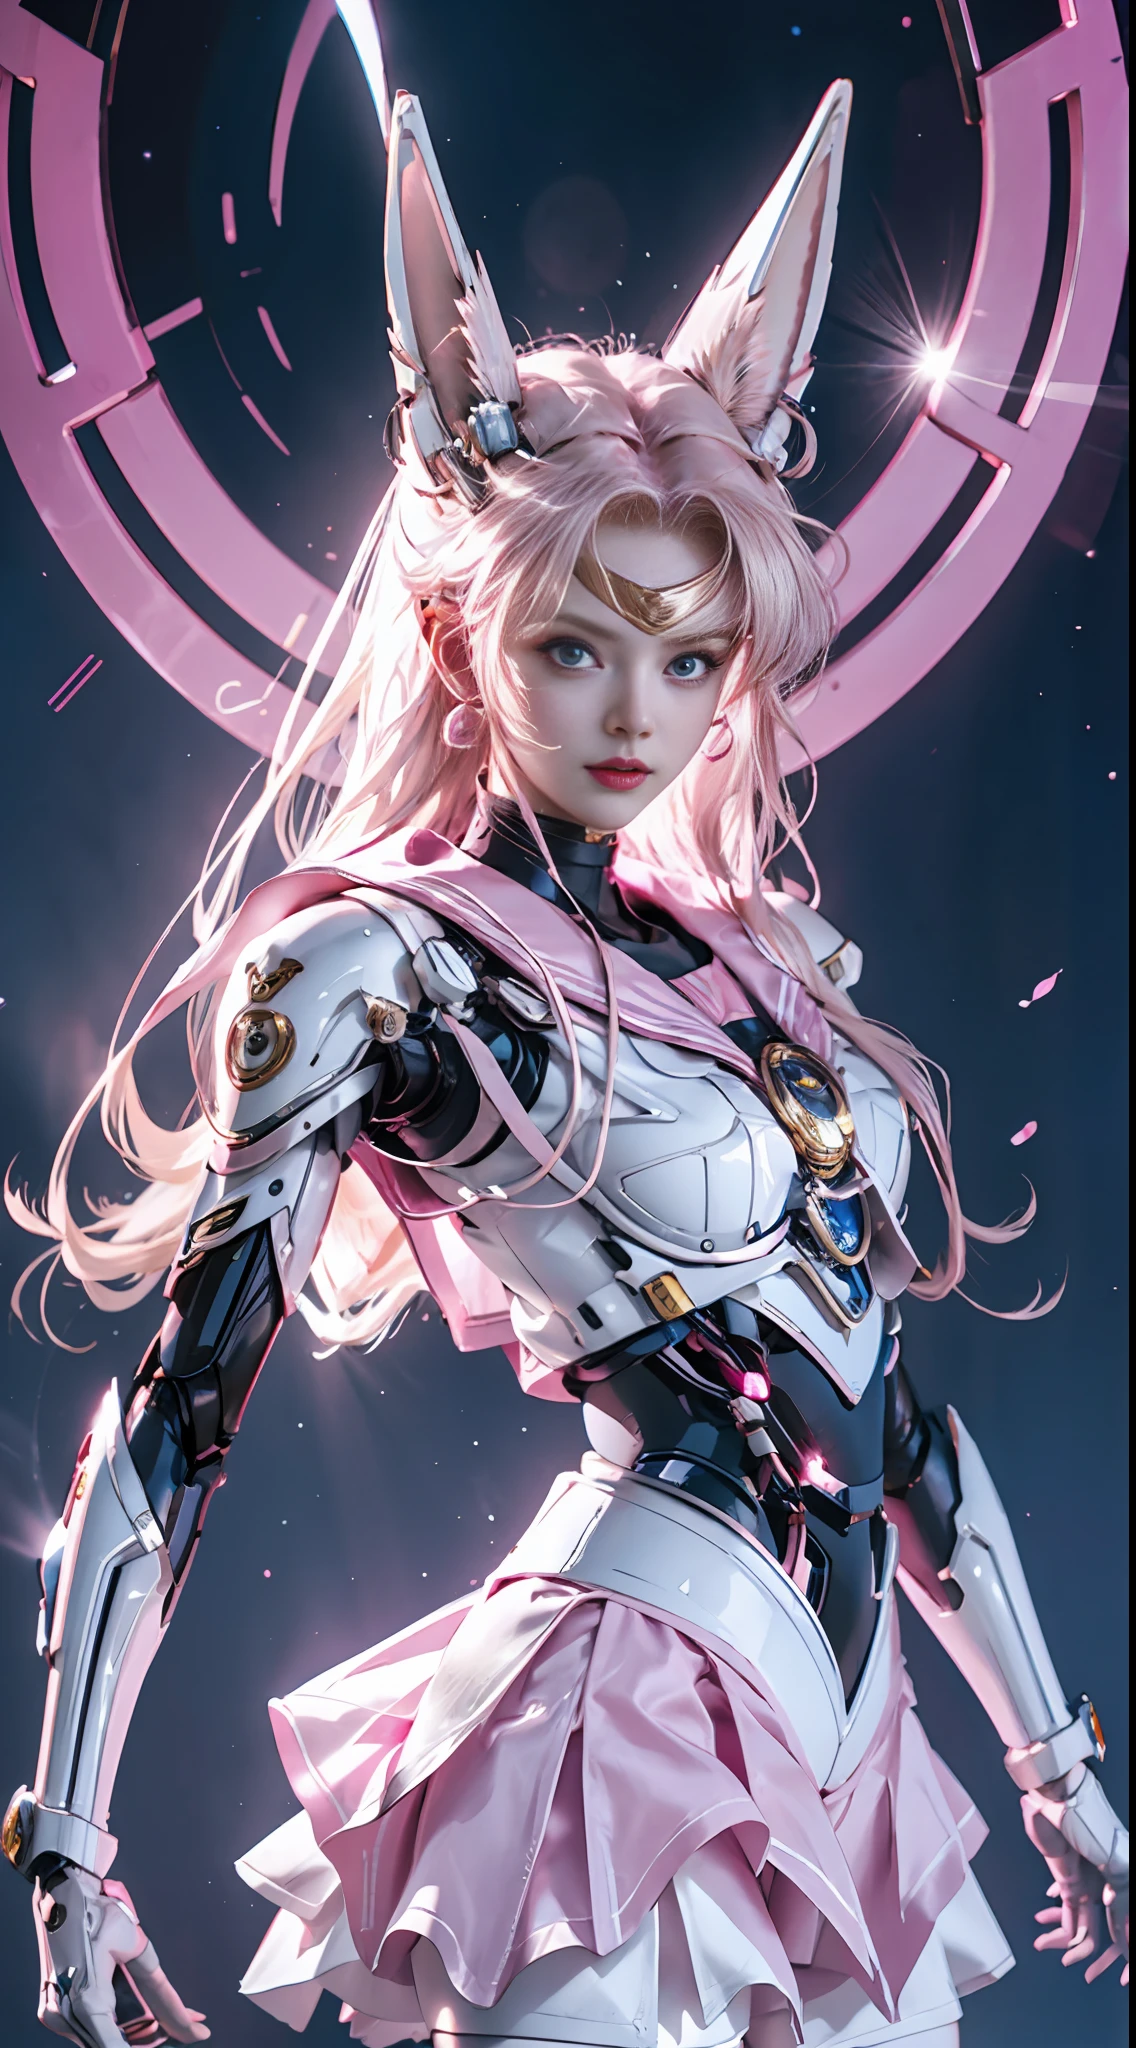 1 mechanical girl: 1.4, Sailor Moon, white mechanical arm, humanoid body, pink sailor suit, good-looking face, sailor Moon, wings, moon hare, rabbit ears, mechanical ears, white top, blonde hair, mechanical arm, pink skirt, side, halo, sci-fi background, hair glowing hair, forehead hair light, moon, panorama, archery, wings on the background